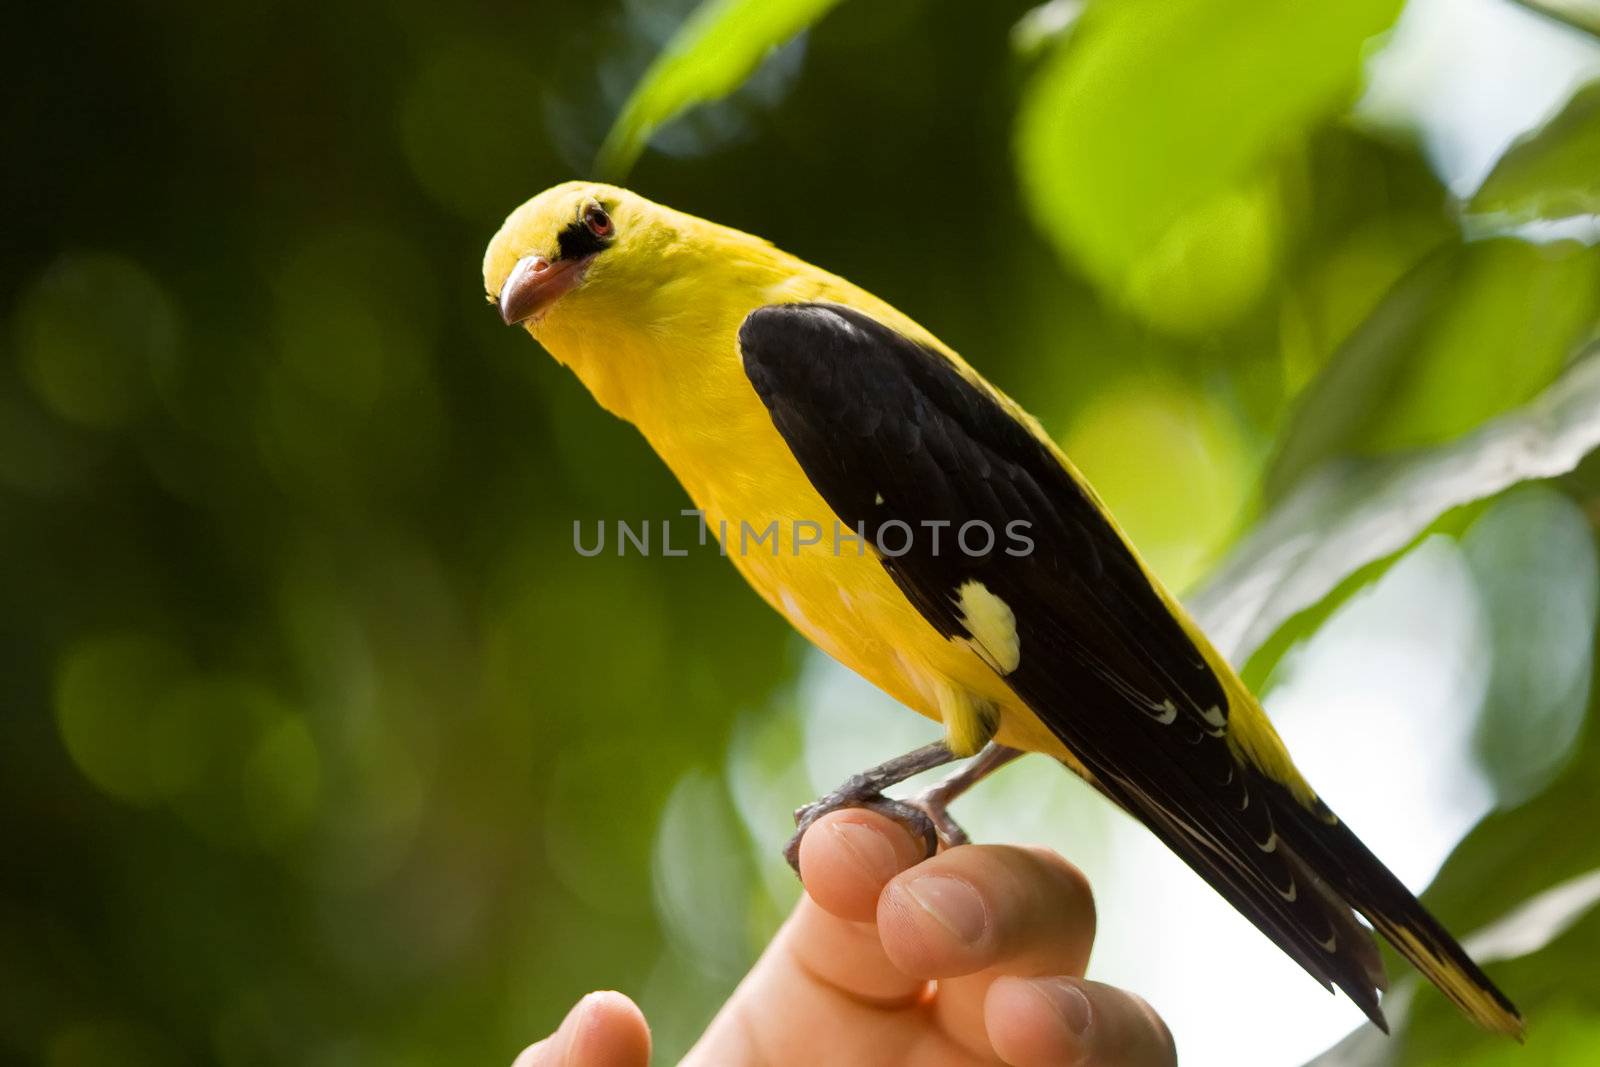 Golden oriole sitting on a hand